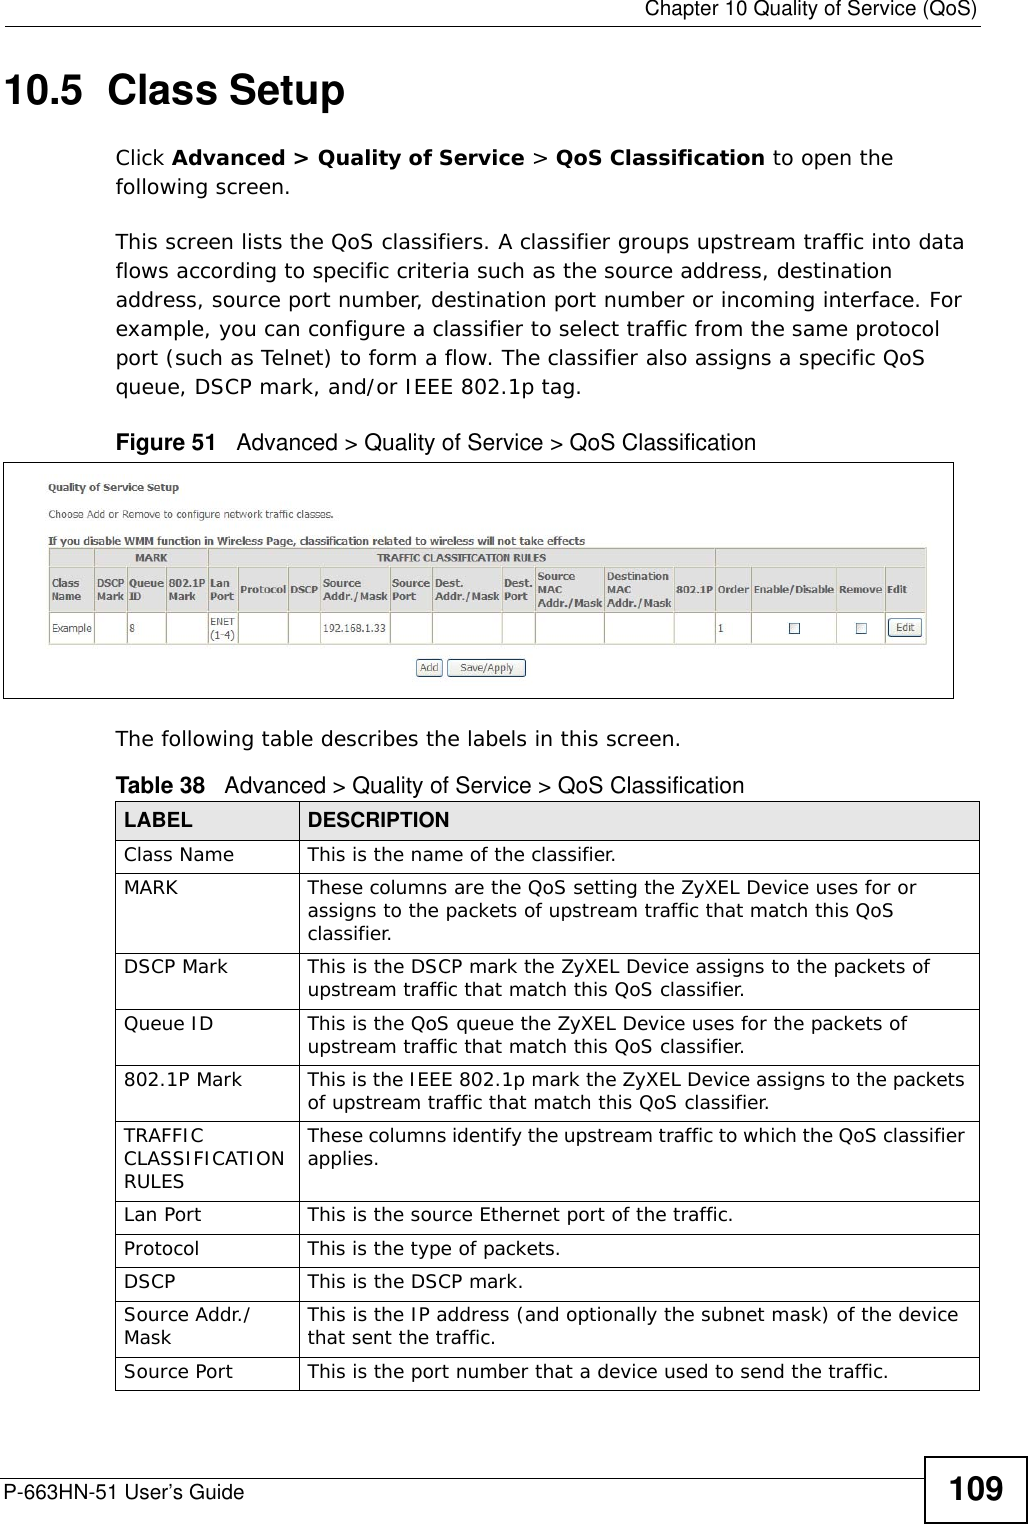  Chapter 10 Quality of Service (QoS)P-663HN-51 User’s Guide 10910.5  Class Setup   Click Advanced &gt; Quality of Service &gt; QoS Classification to open the following screen.This screen lists the QoS classifiers. A classifier groups upstream traffic into data flows according to specific criteria such as the source address, destination address, source port number, destination port number or incoming interface. For example, you can configure a classifier to select traffic from the same protocol port (such as Telnet) to form a flow. The classifier also assigns a specific QoS queue, DSCP mark, and/or IEEE 802.1p tag.Figure 51   Advanced &gt; Quality of Service &gt; QoS ClassificationThe following table describes the labels in this screen.  Table 38   Advanced &gt; Quality of Service &gt; QoS ClassificationLABEL DESCRIPTIONClass Name This is the name of the classifier.MARK These columns are the QoS setting the ZyXEL Device uses for or assigns to the packets of upstream traffic that match this QoS classifier.DSCP Mark This is the DSCP mark the ZyXEL Device assigns to the packets of upstream traffic that match this QoS classifier.Queue ID This is the QoS queue the ZyXEL Device uses for the packets of upstream traffic that match this QoS classifier.802.1P Mark This is the IEEE 802.1p mark the ZyXEL Device assigns to the packets of upstream traffic that match this QoS classifier.TRAFFIC CLASSIFICATION RULESThese columns identify the upstream traffic to which the QoS classifier applies.Lan Port This is the source Ethernet port of the traffic.Protocol This is the type of packets.DSCP This is the DSCP mark.Source Addr./Mask This is the IP address (and optionally the subnet mask) of the device that sent the traffic.Source Port This is the port number that a device used to send the traffic.